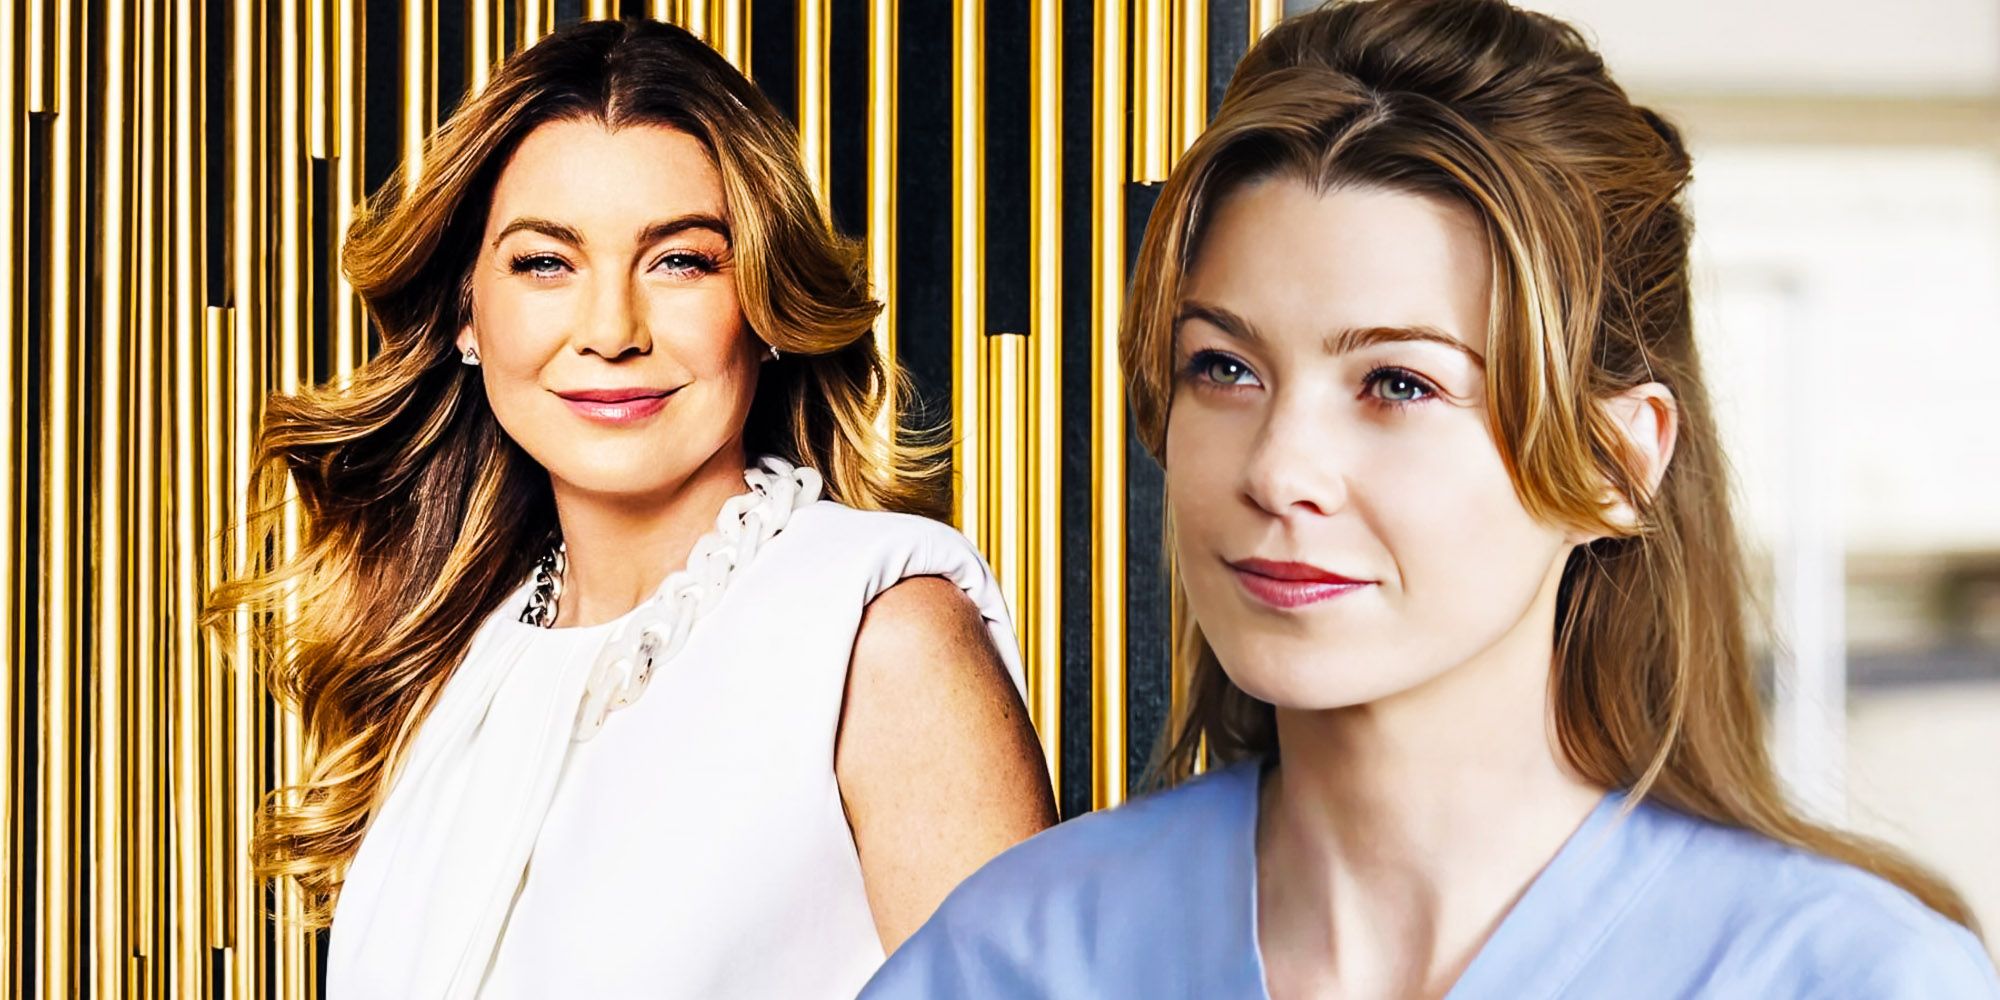 Greys anatomy old and young ellen pompeo